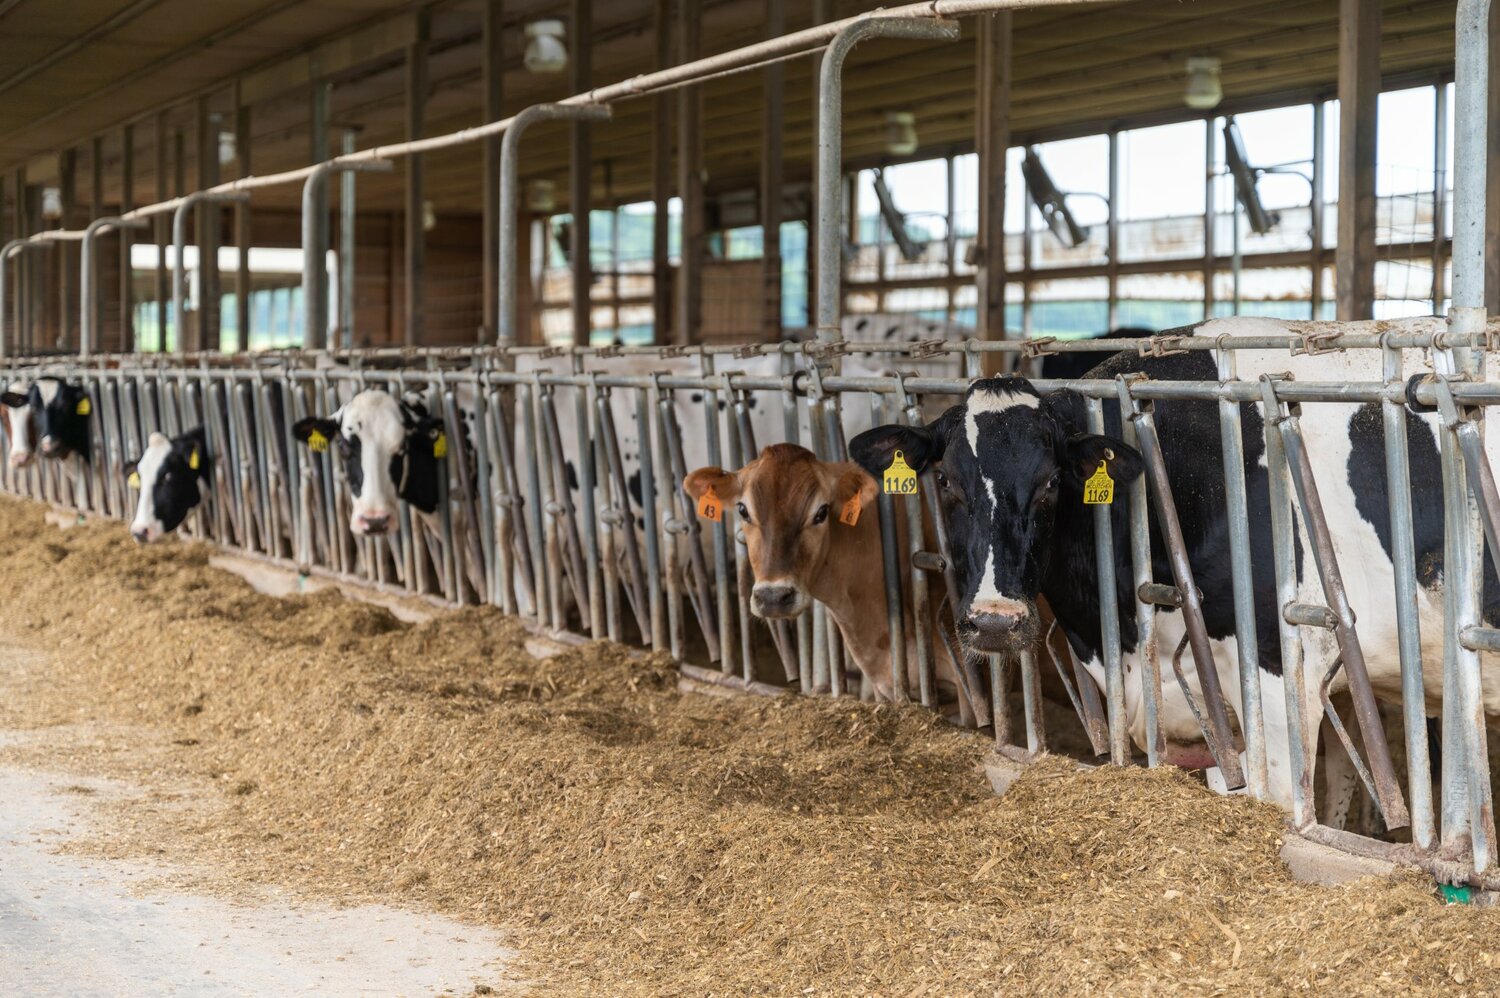 Dairy cows are among the animals housed at the UW-River Falls Mann Valley Farm. This fall, UW-River Falls will host the longstanding Farm and Industry Short Course that teaches participants about farming during 16 weeks of classes.